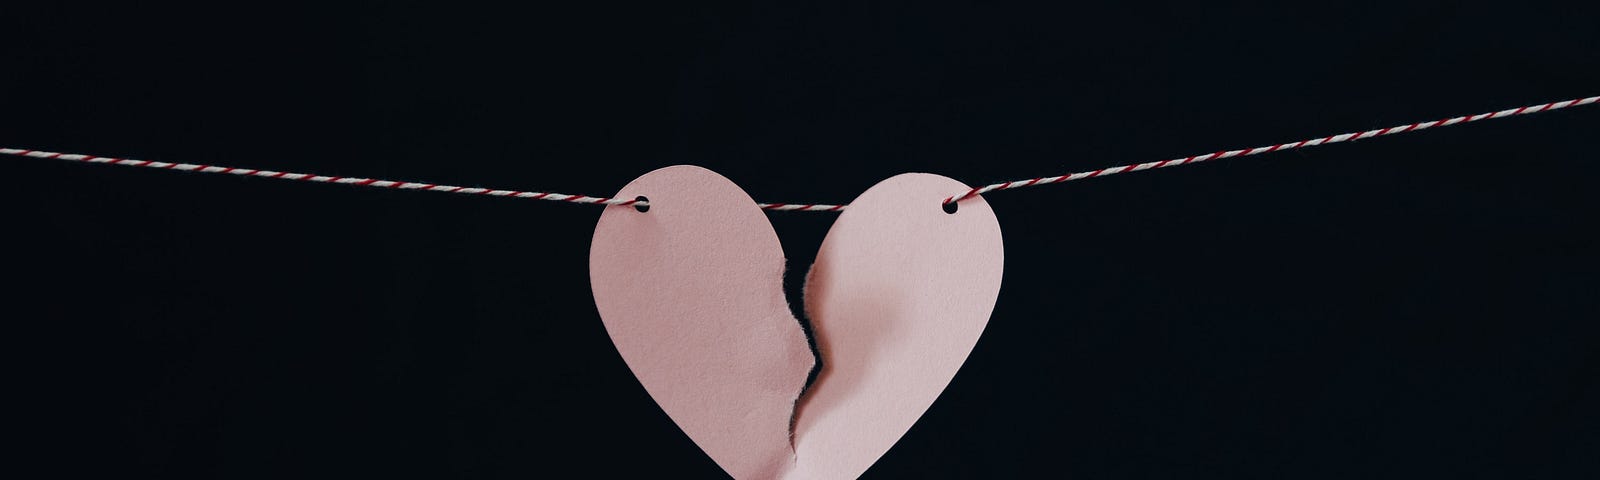 A broken heart hanging on a string.